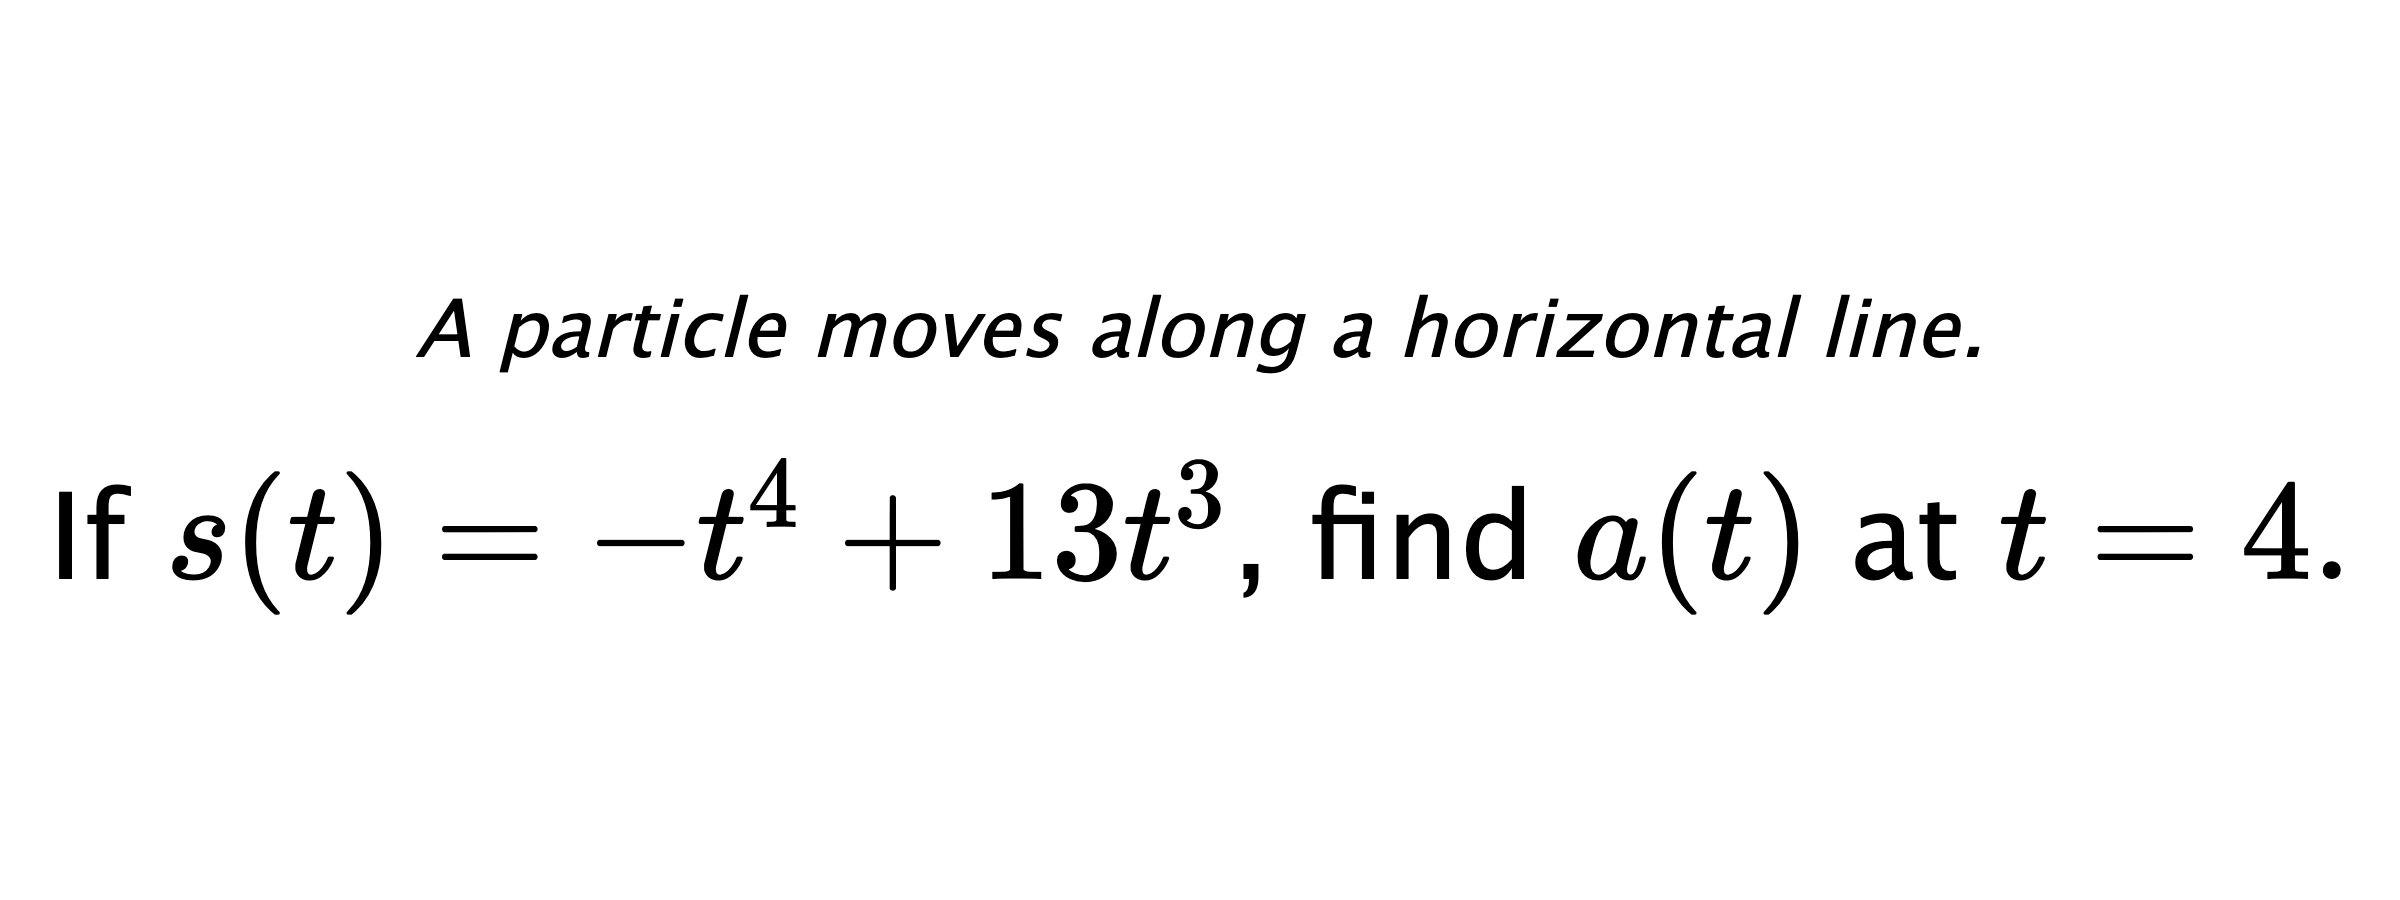 A particle moves along a horizontal line. If $ s(t)=-t^4+13t^3 $, find $ a(t) $ at $ t=4 .$